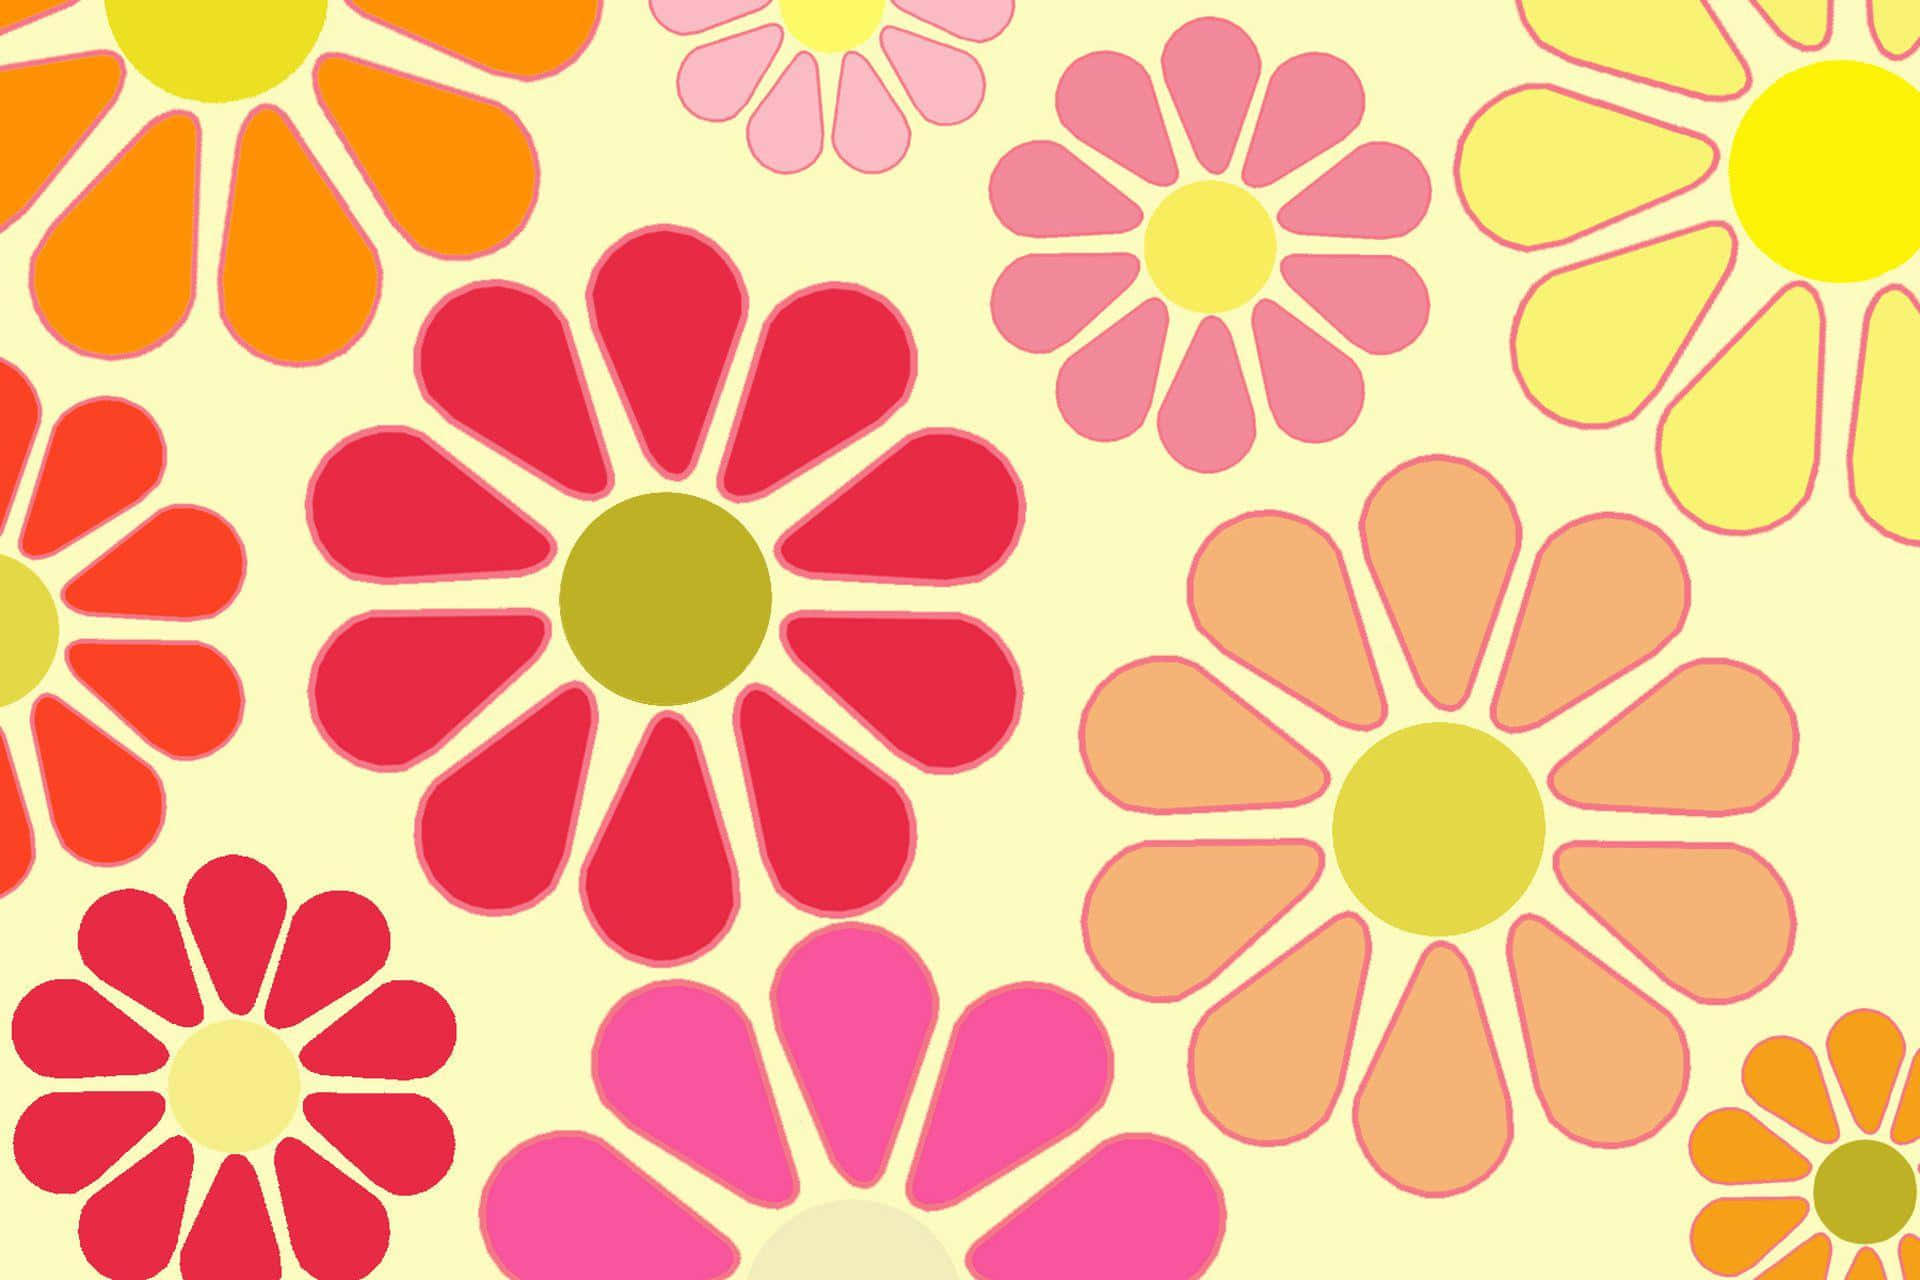 Download 70's Groovy Background Colorful Flower Pattern Drawing | Wallpapers .com